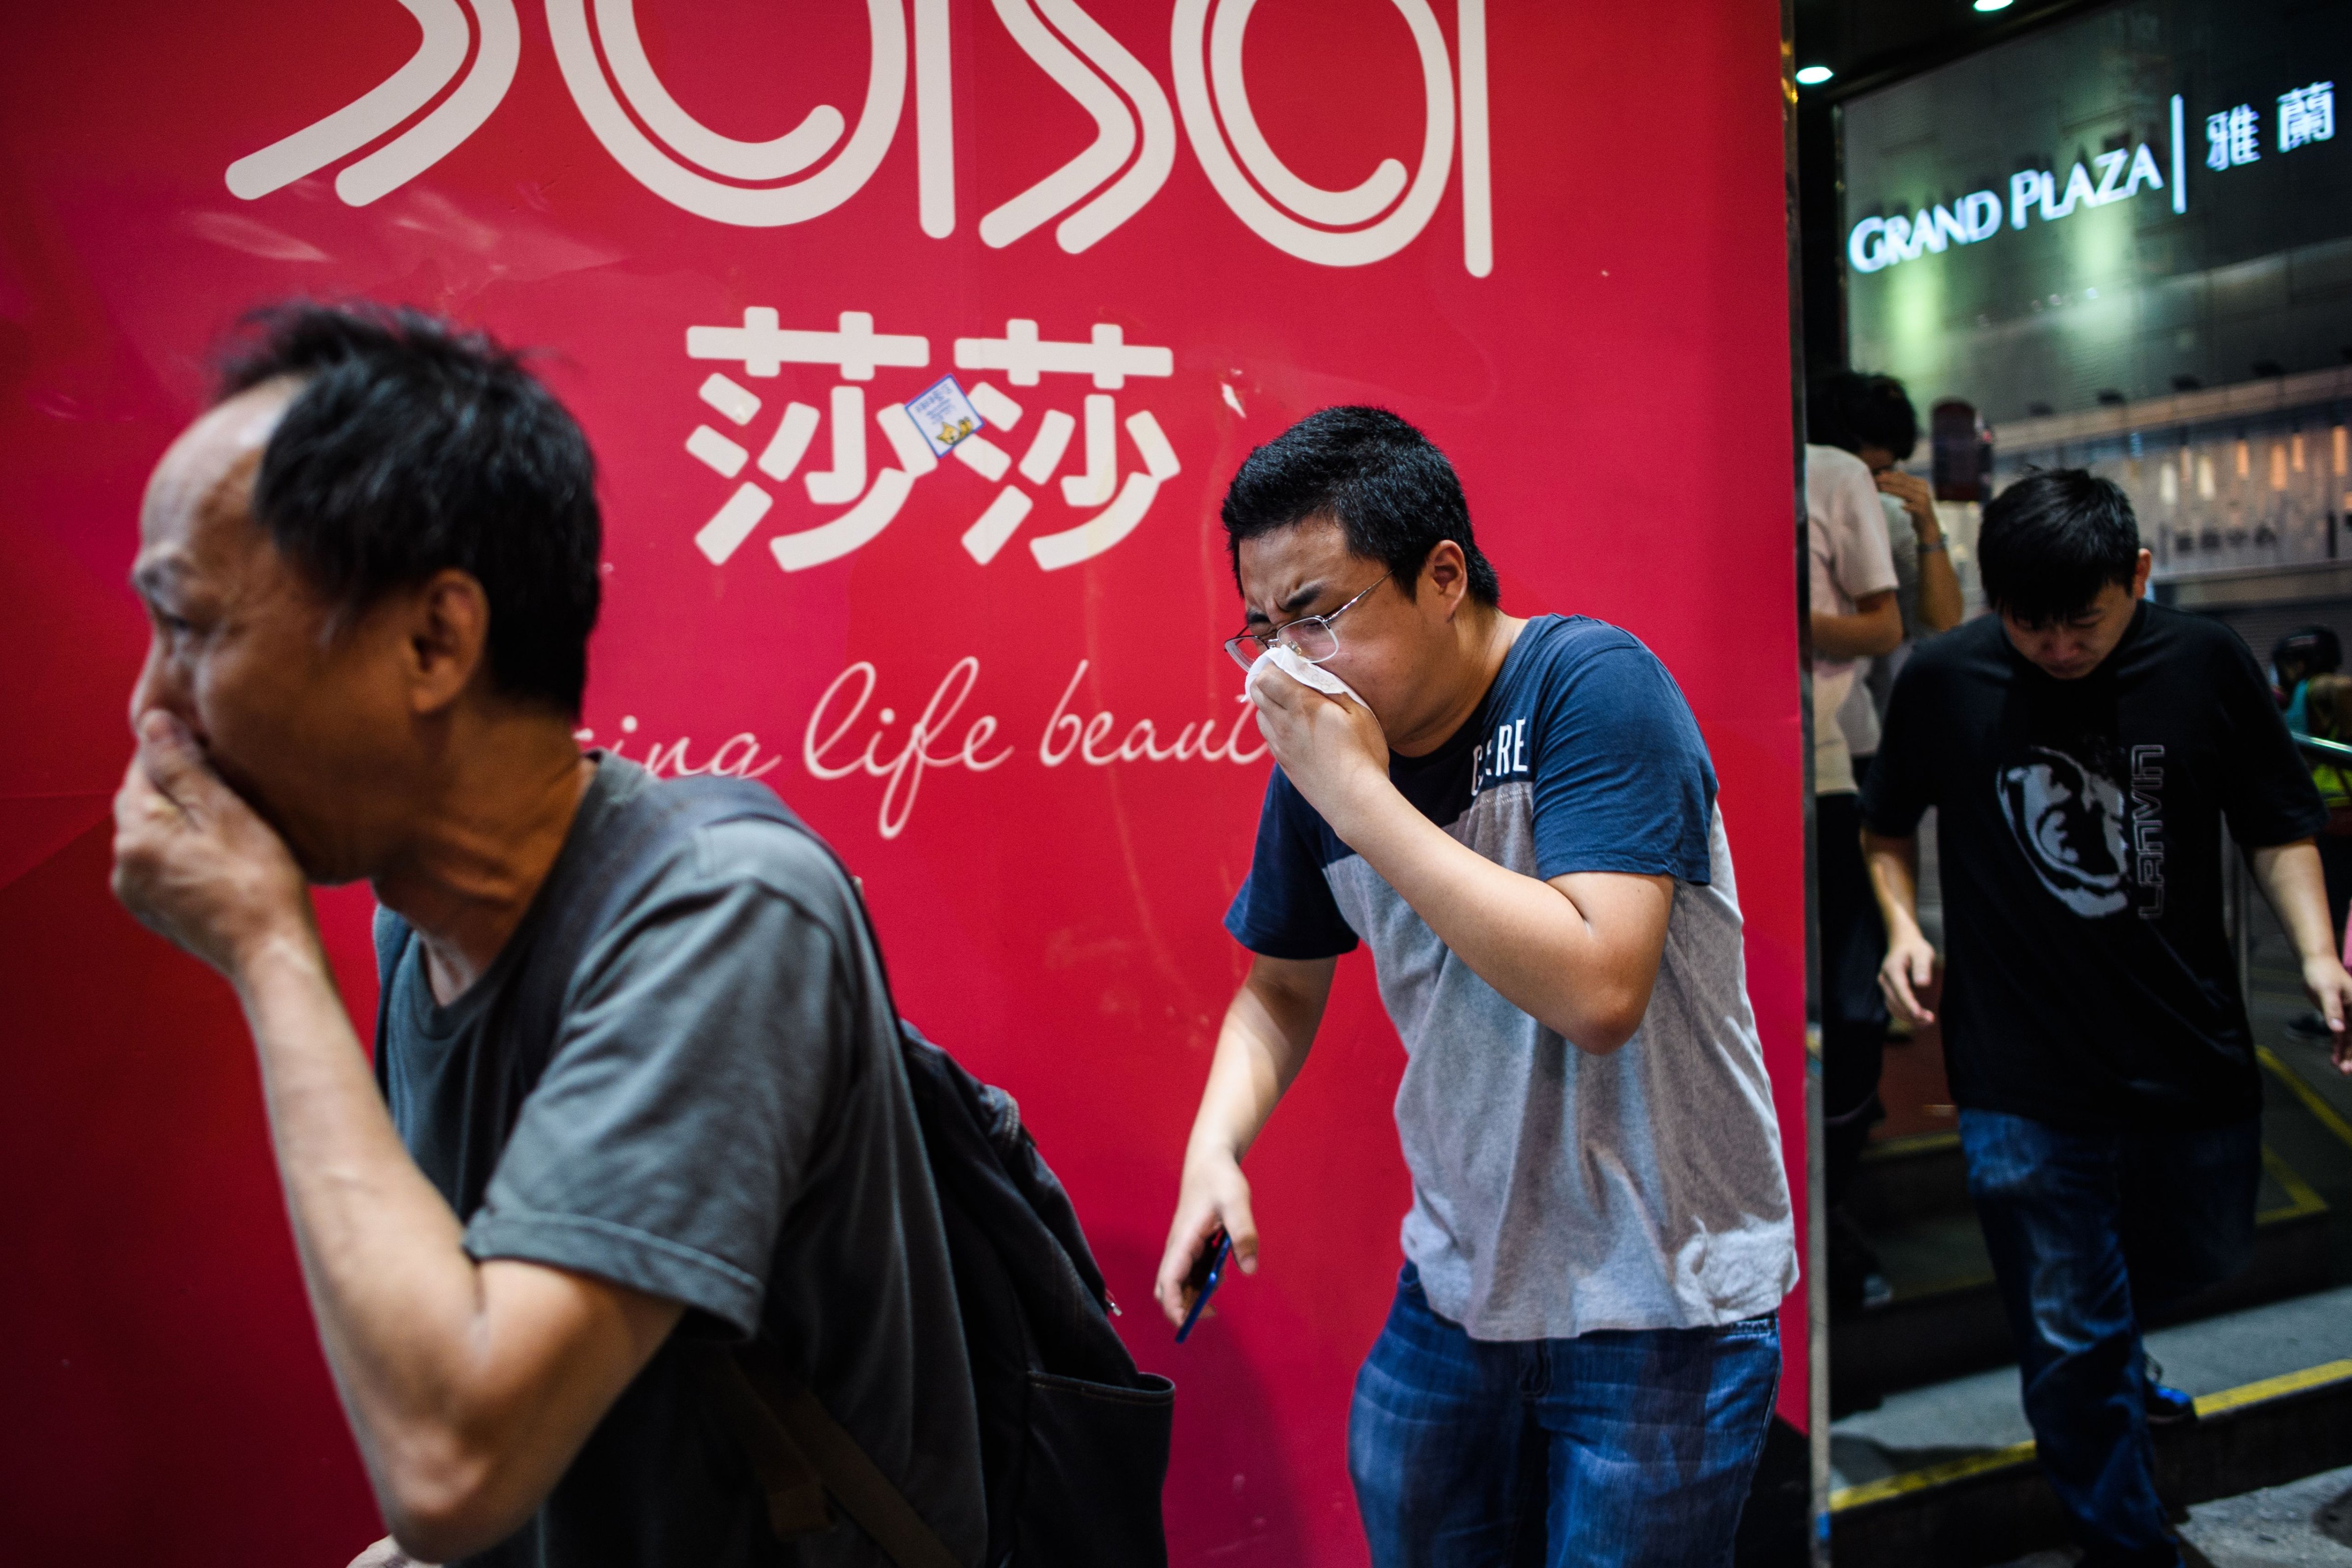 Bystanders react after police fired tear gas to disperse residents and protesters in the Mong Kok district of Kowloon in Hong Kong on October 27, 2019. (ANTHONY WALLACE—AFP via Getty Images)